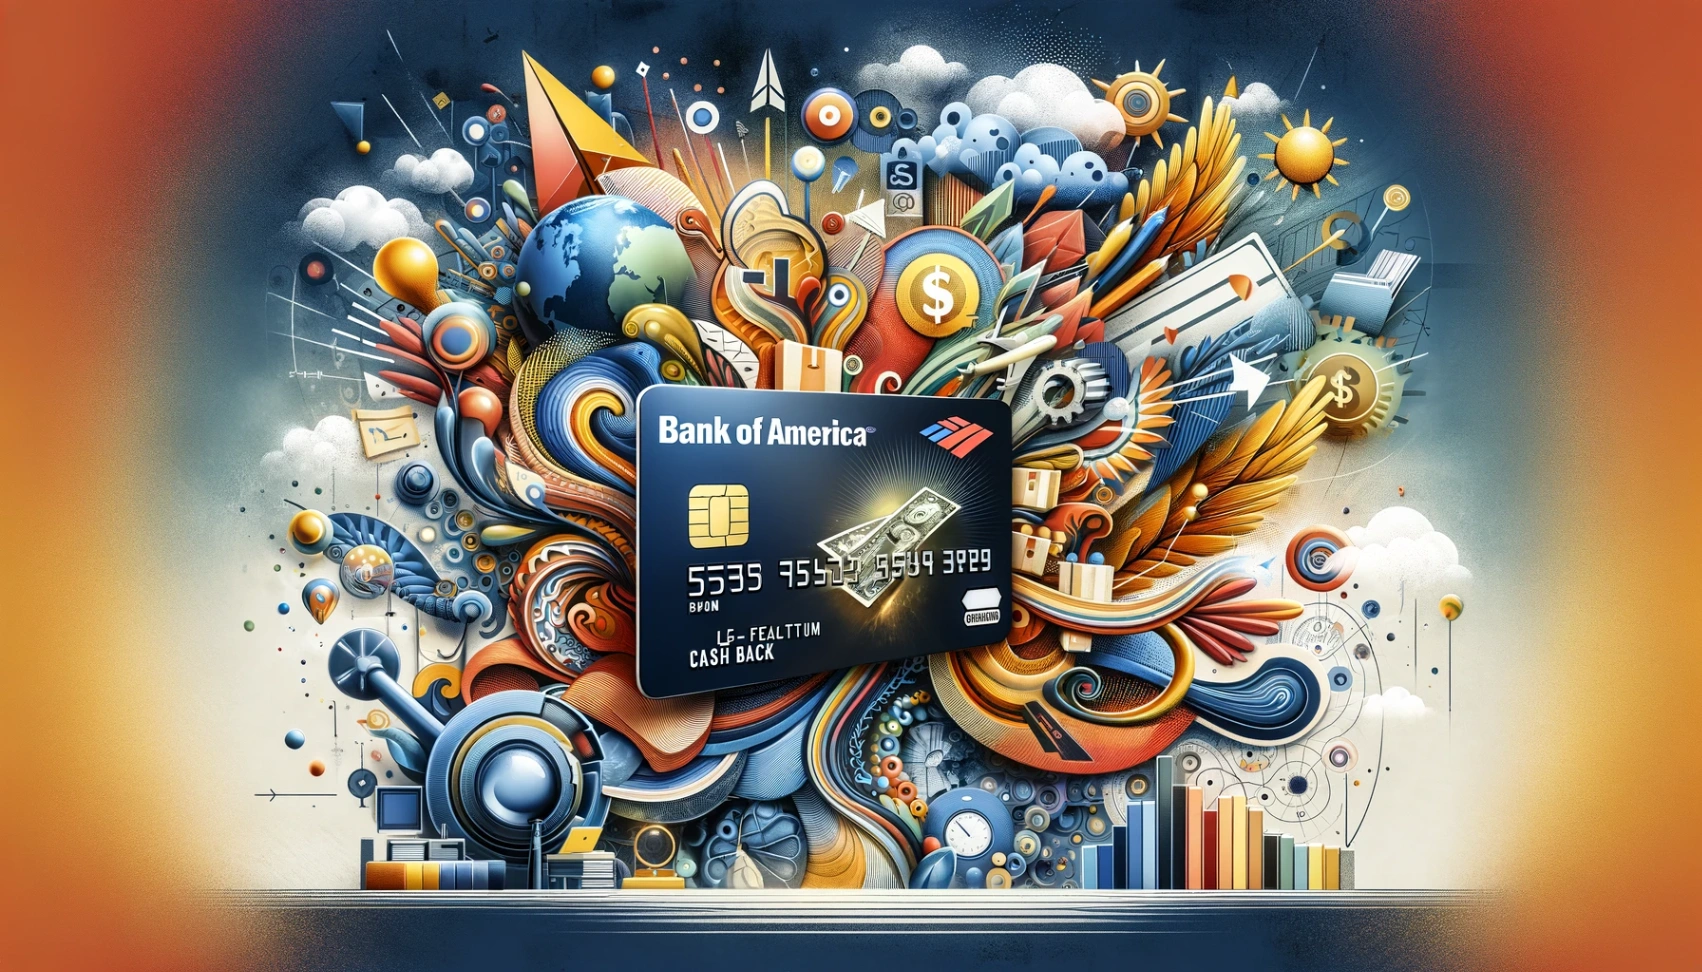 Bank of America Credit Card: Learn How to Apply and the Benefits and Rewards